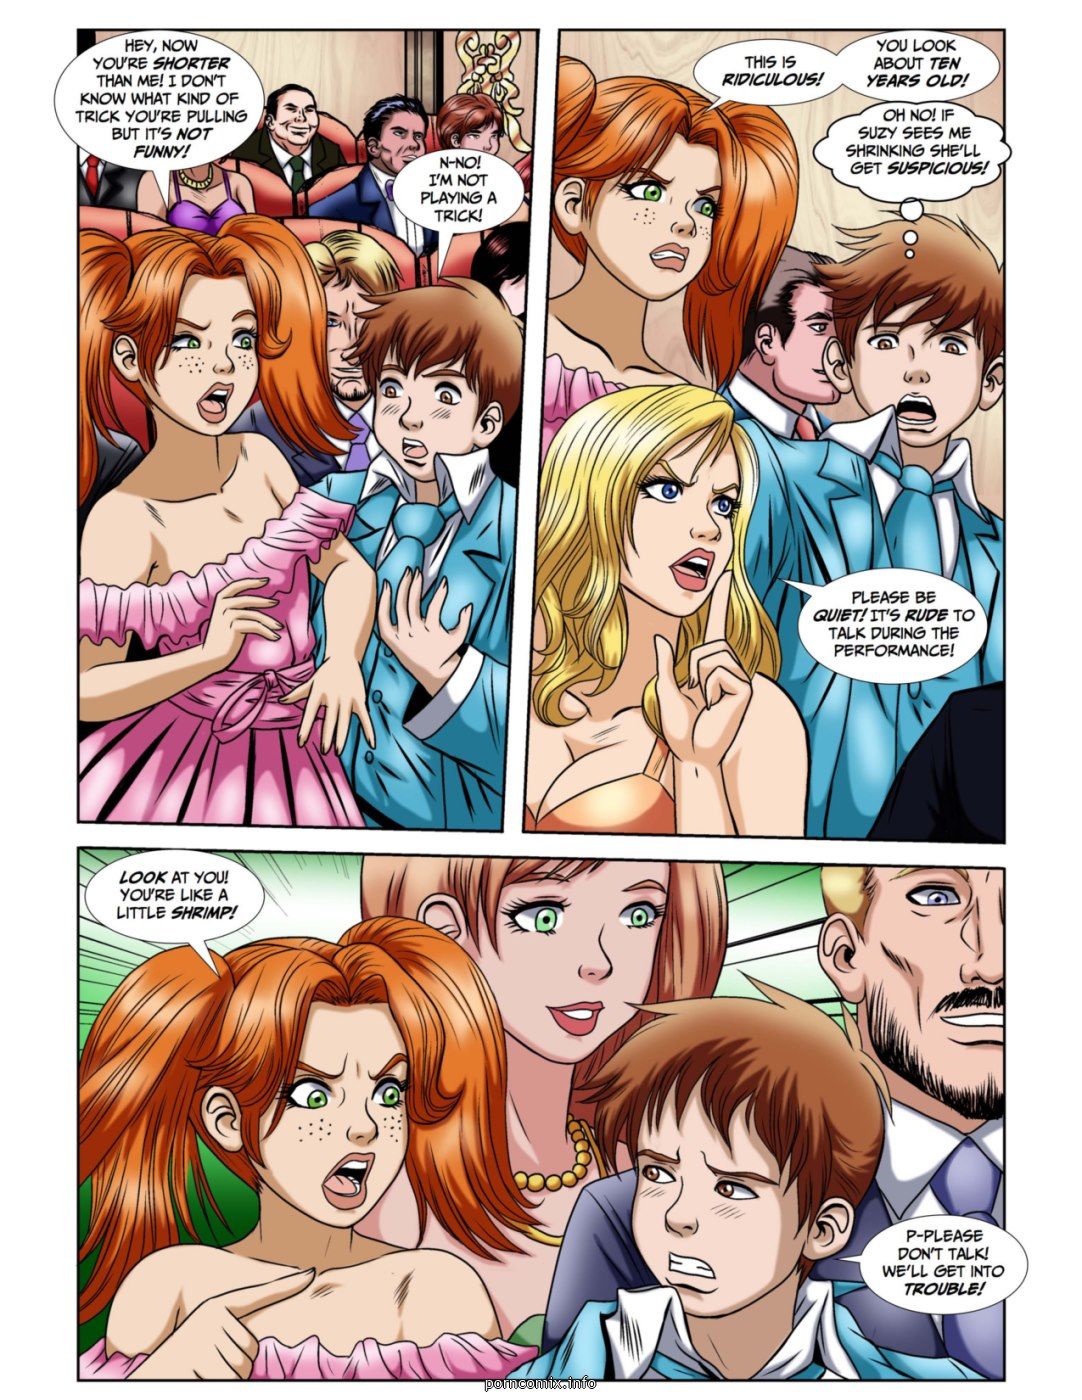 Dream Tales - A Night at the Opera,Sex page 15